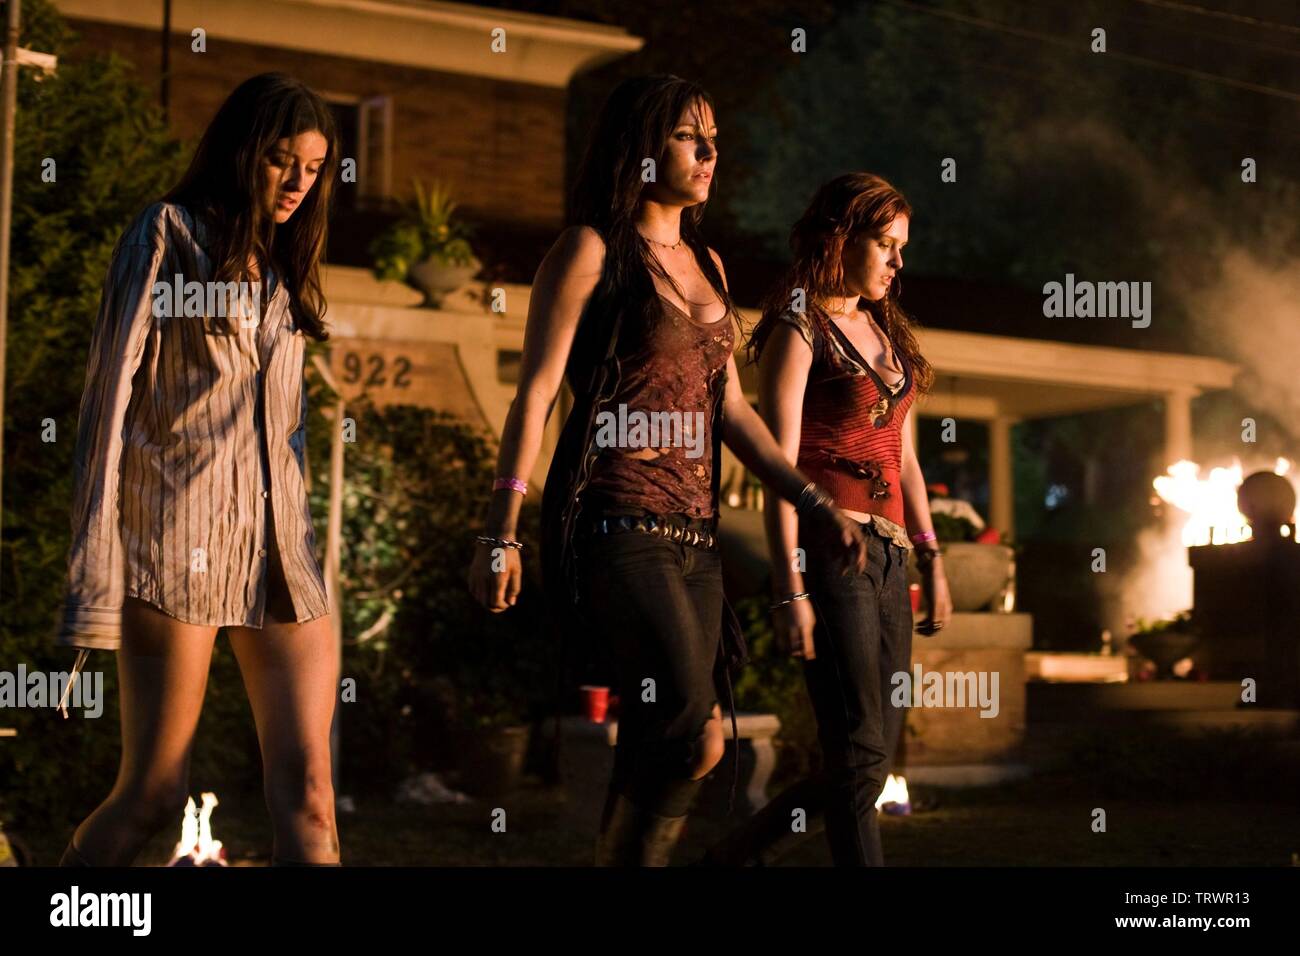 CAROLINE D'AMORE , RUMER WILLIS and BRIANA EVIGAN in SORORITY ROW (2009). Copyright: Editorial use only. No merchandising or book covers. This is a publicly distributed handout. Access rights only, no license of copyright provided. Only to be reproduced in conjunction with promotion of this film. Credit: SUMMIT ENTERTAINMENT / Album Stock Photo